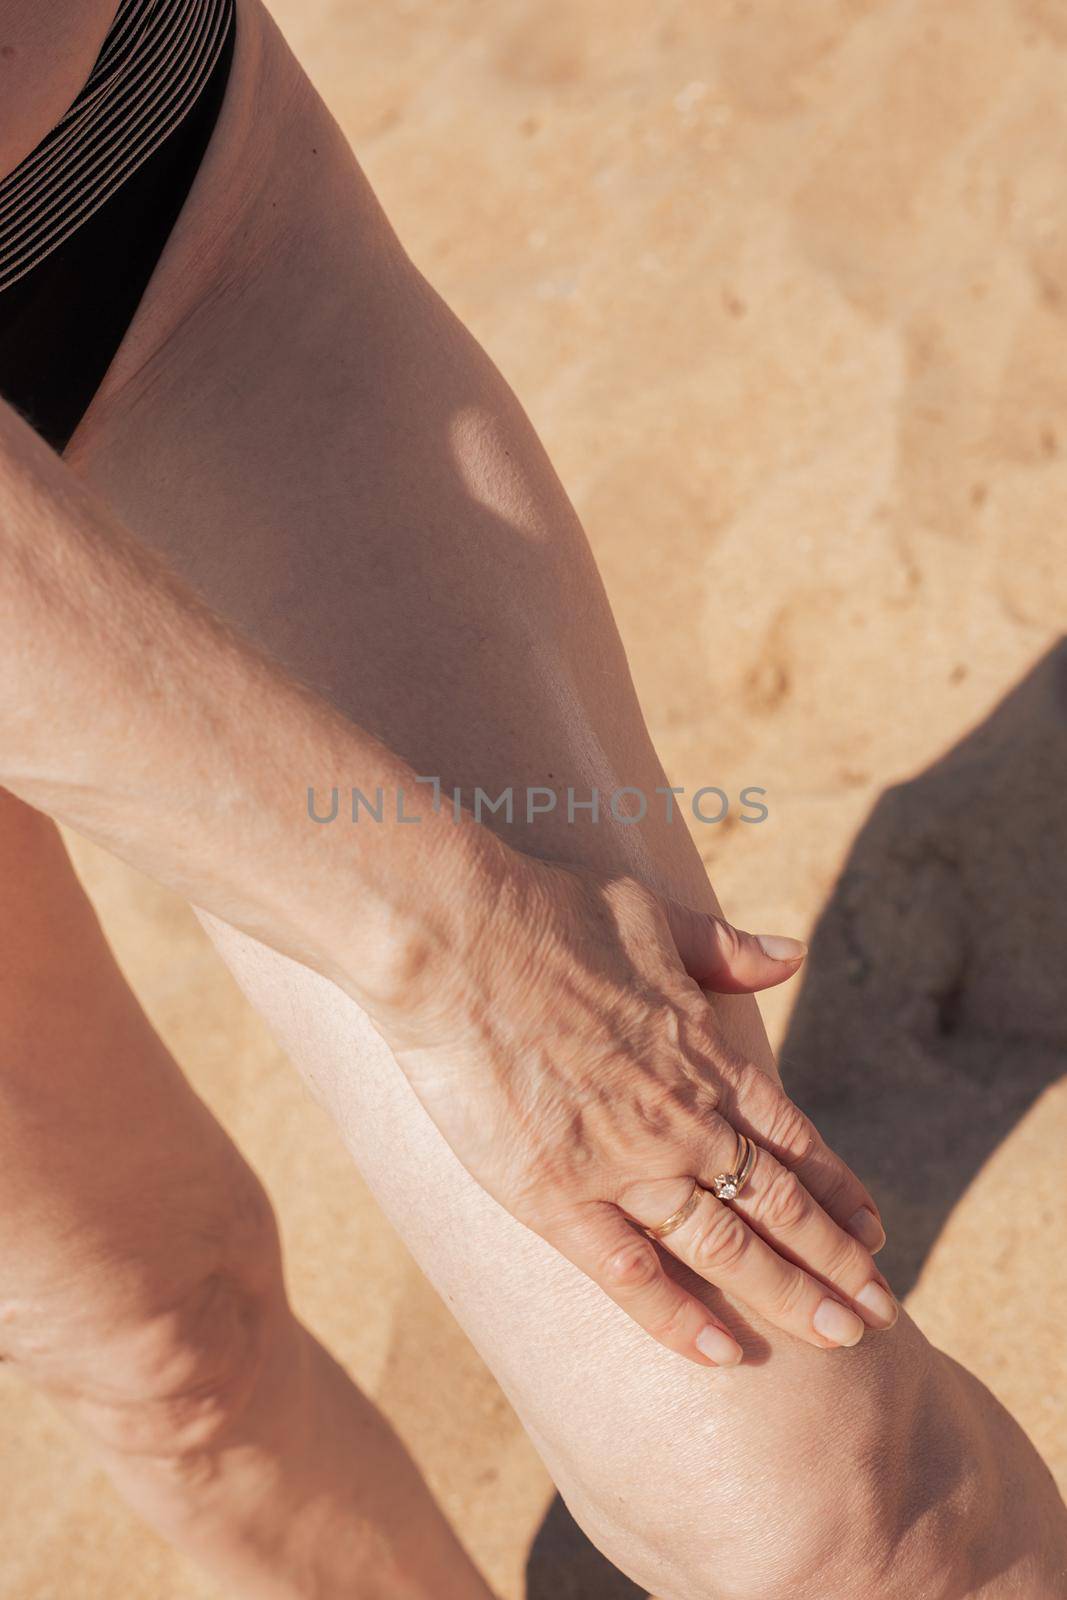 Mature woman with sagging skin smears her legs with sunscreen. Protecting the skin from the bright sun.